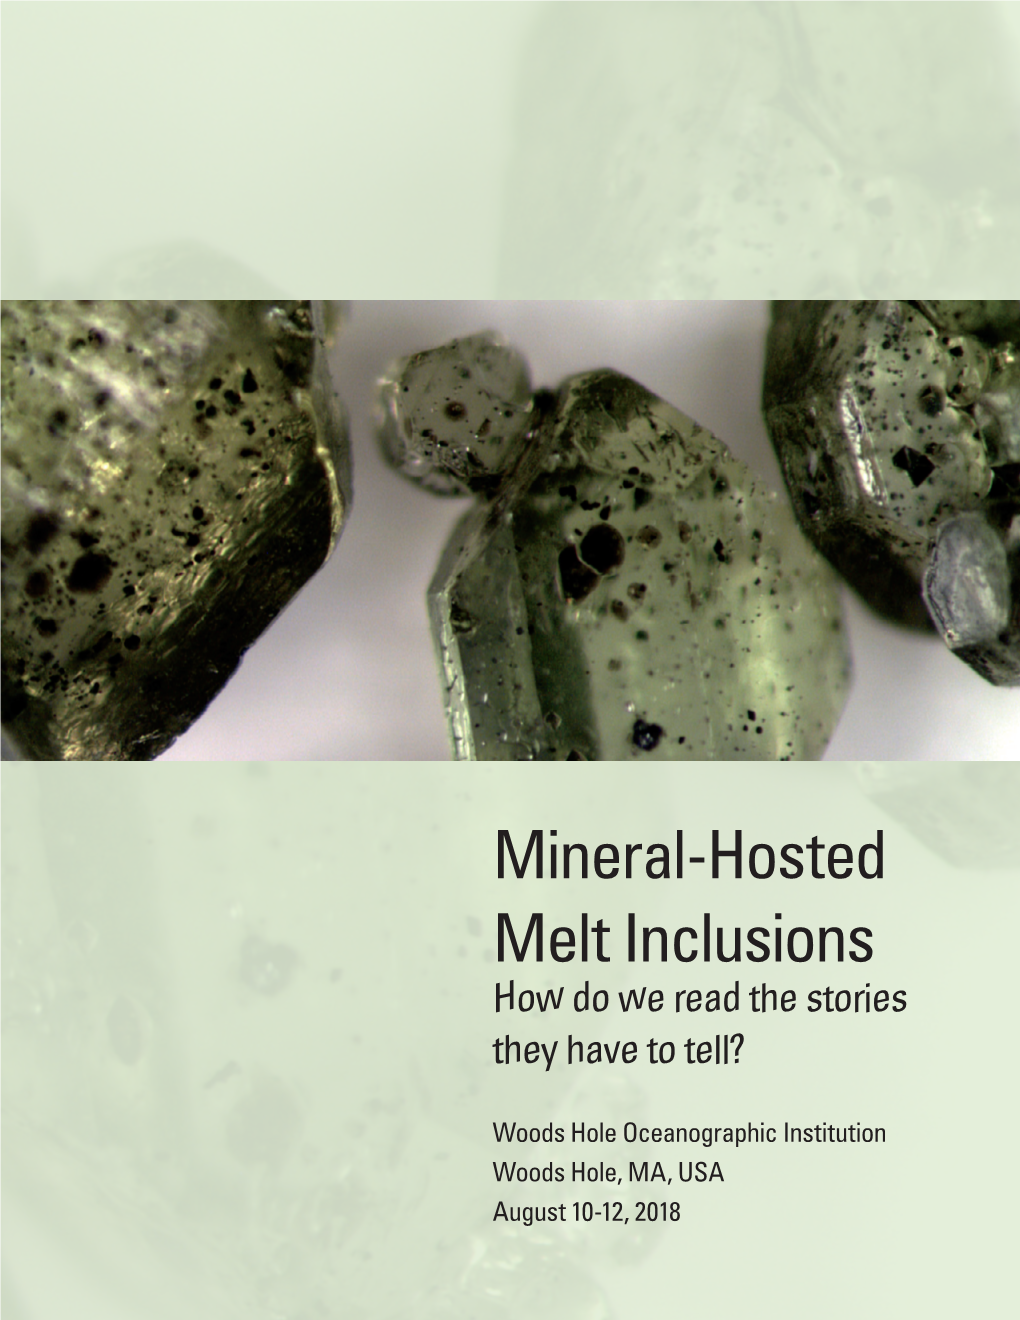 Mineral-Hosted Melt Inclusions How Do We Read the Stories They Have to Tell?